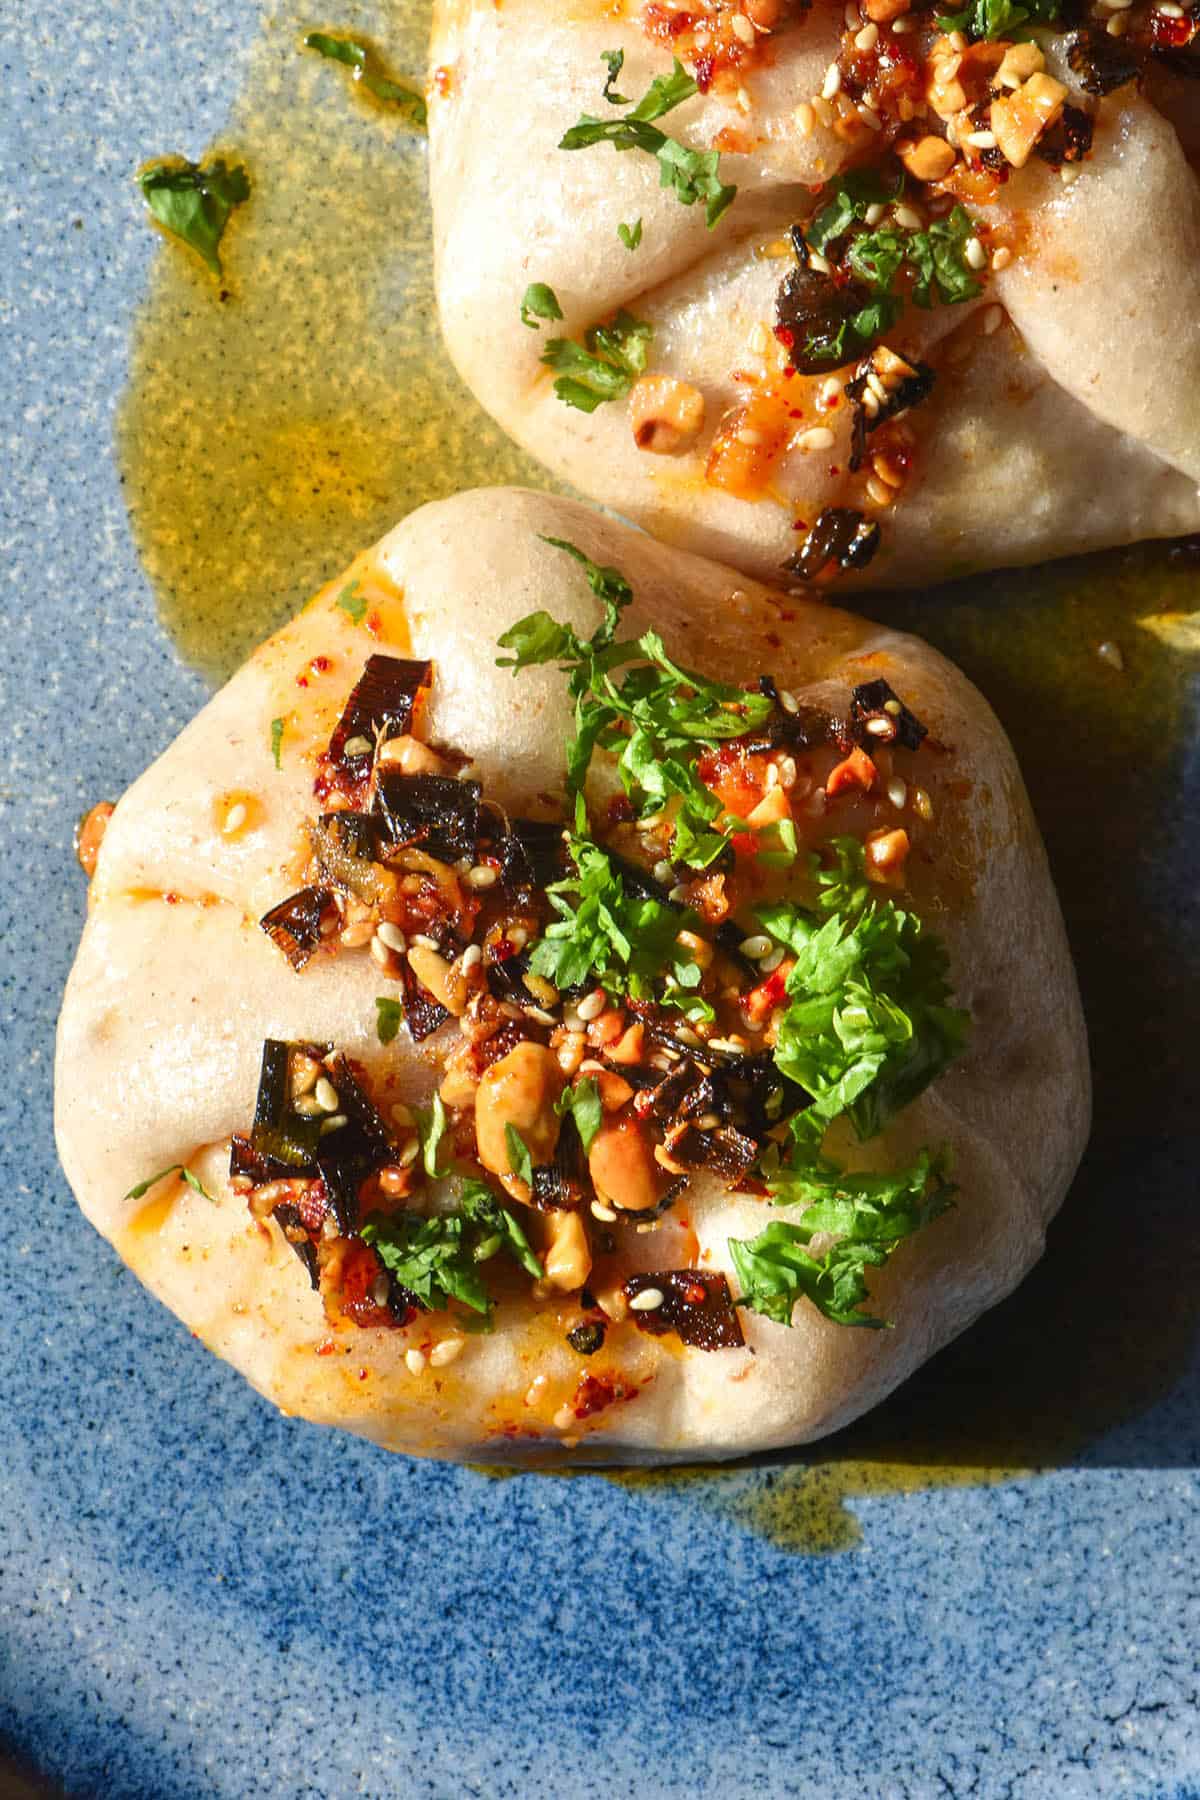 An aerial image of gluten free vegetable buns topped with chilli crisp and chopped coriander. The buns sit atop a bright blue ceramic plate in bright sunlight.